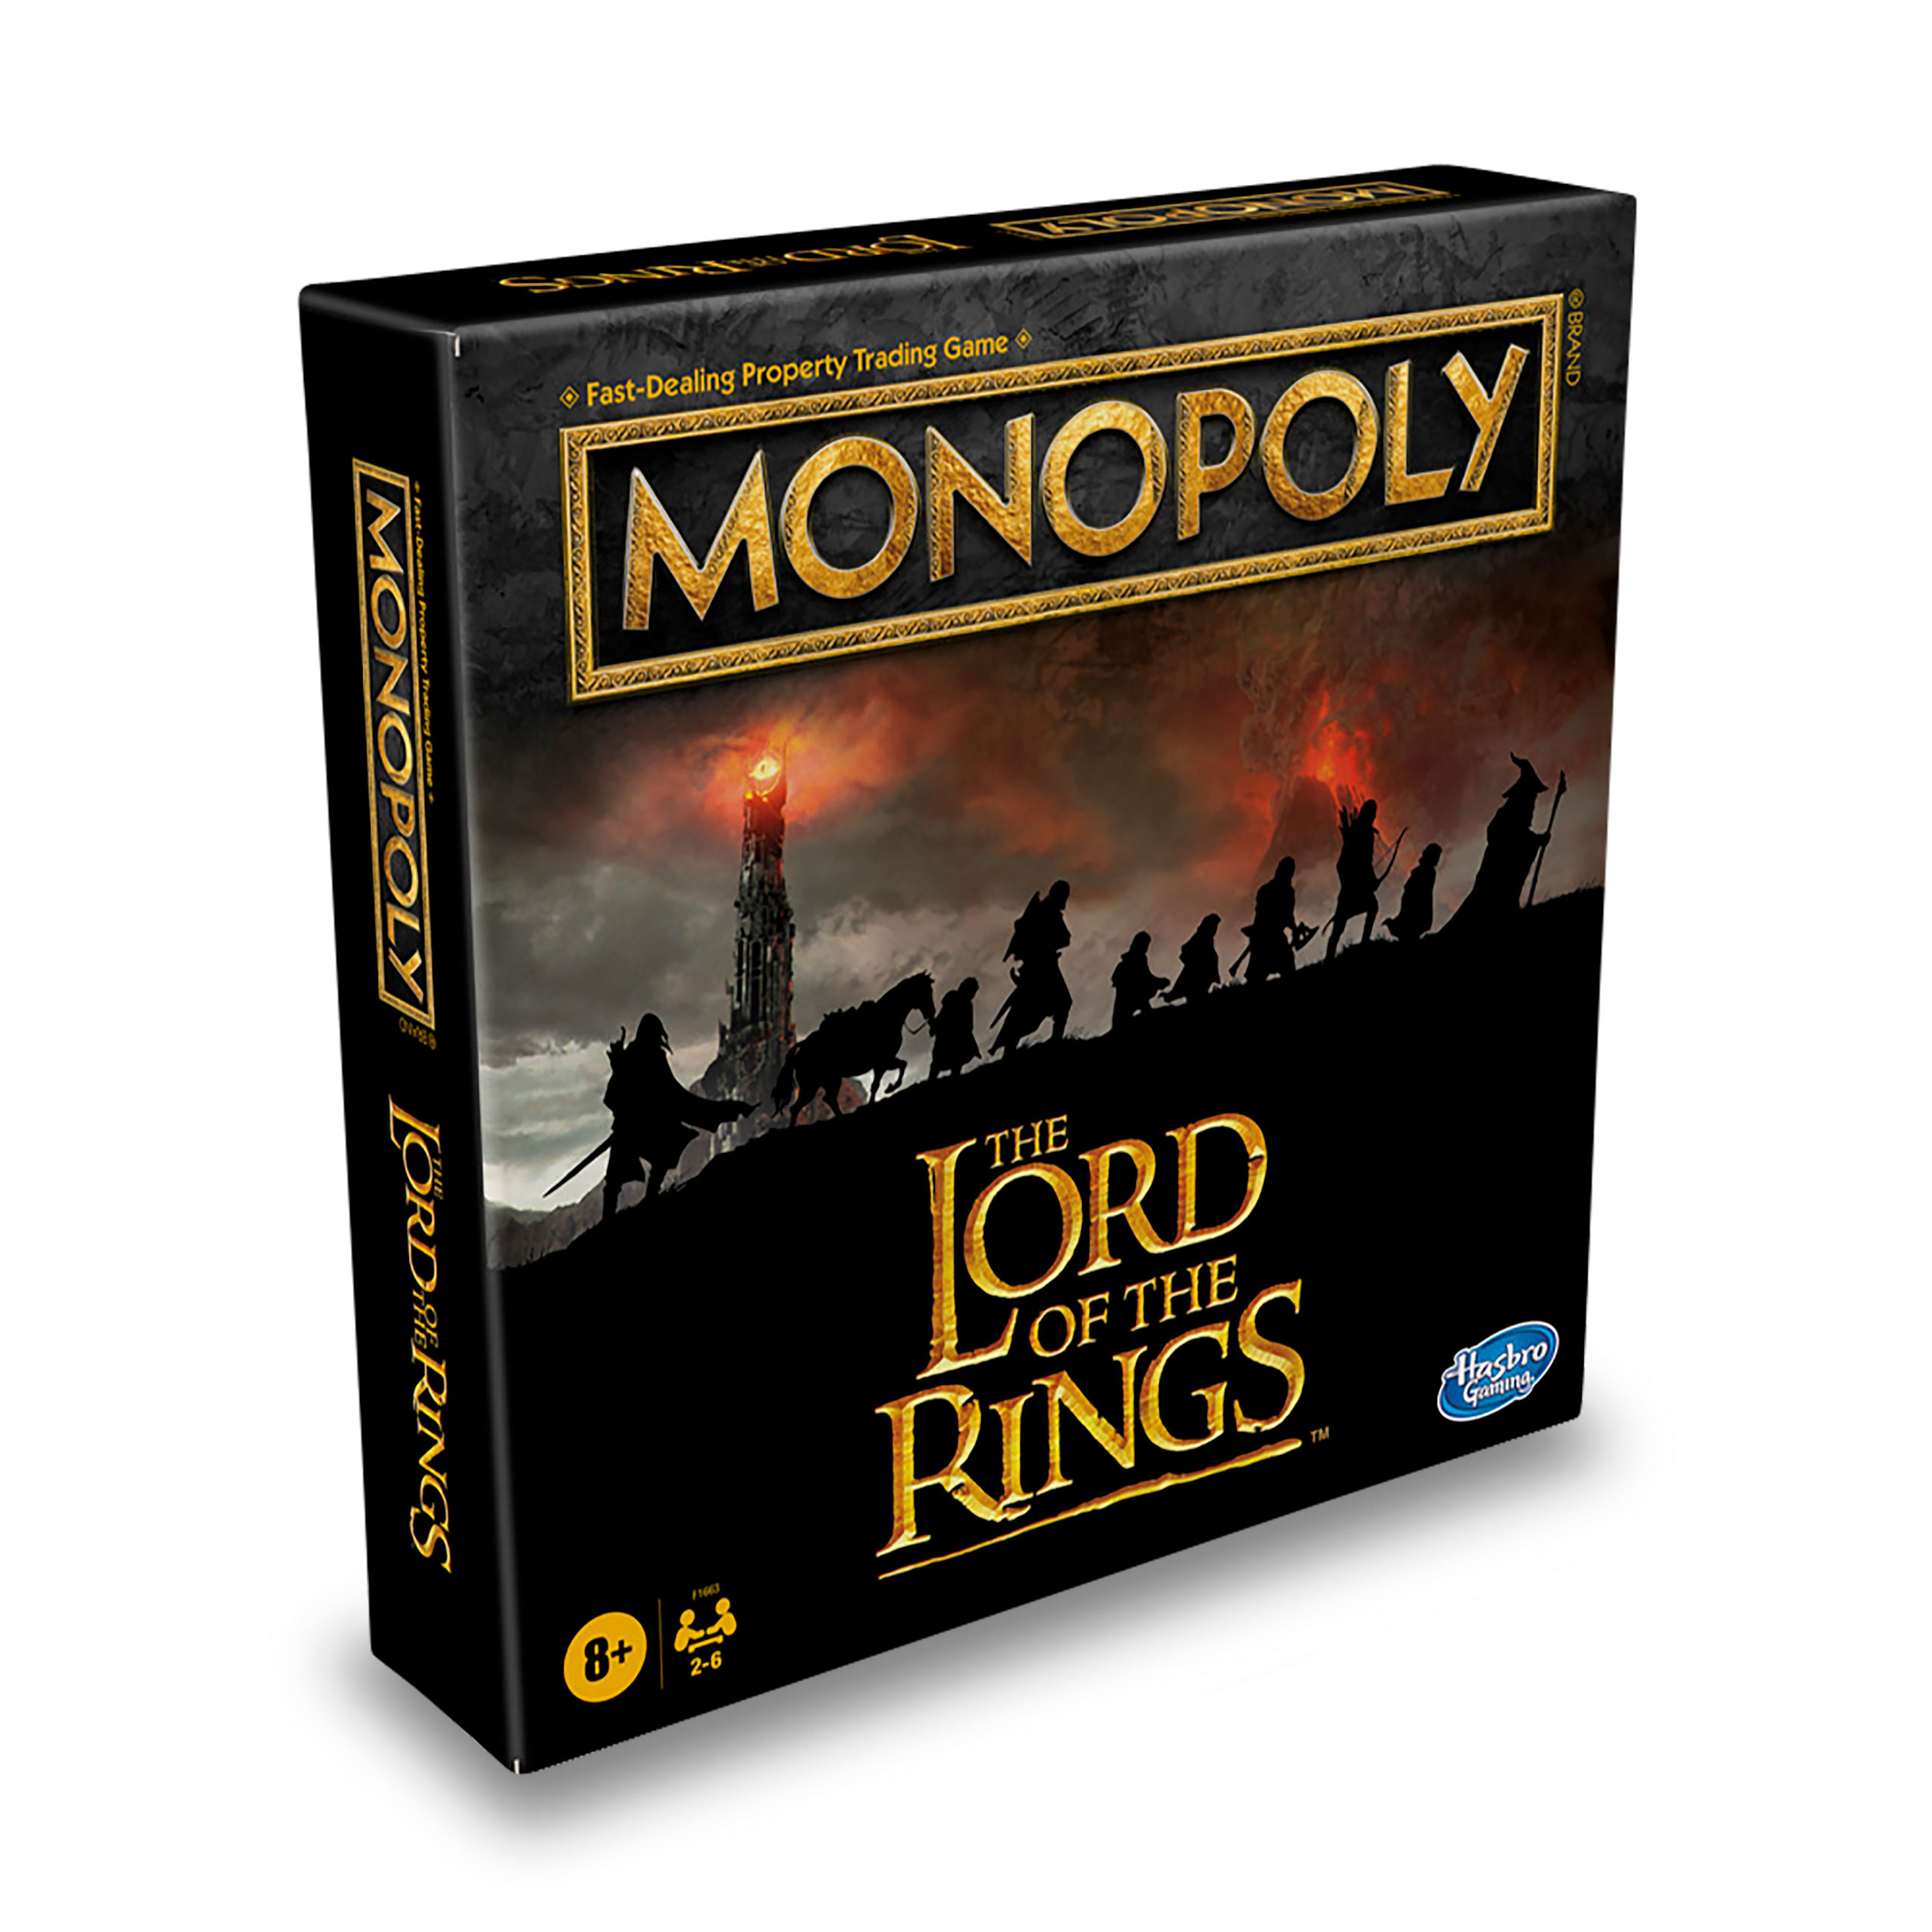 Lord of the Rings - Monopoly